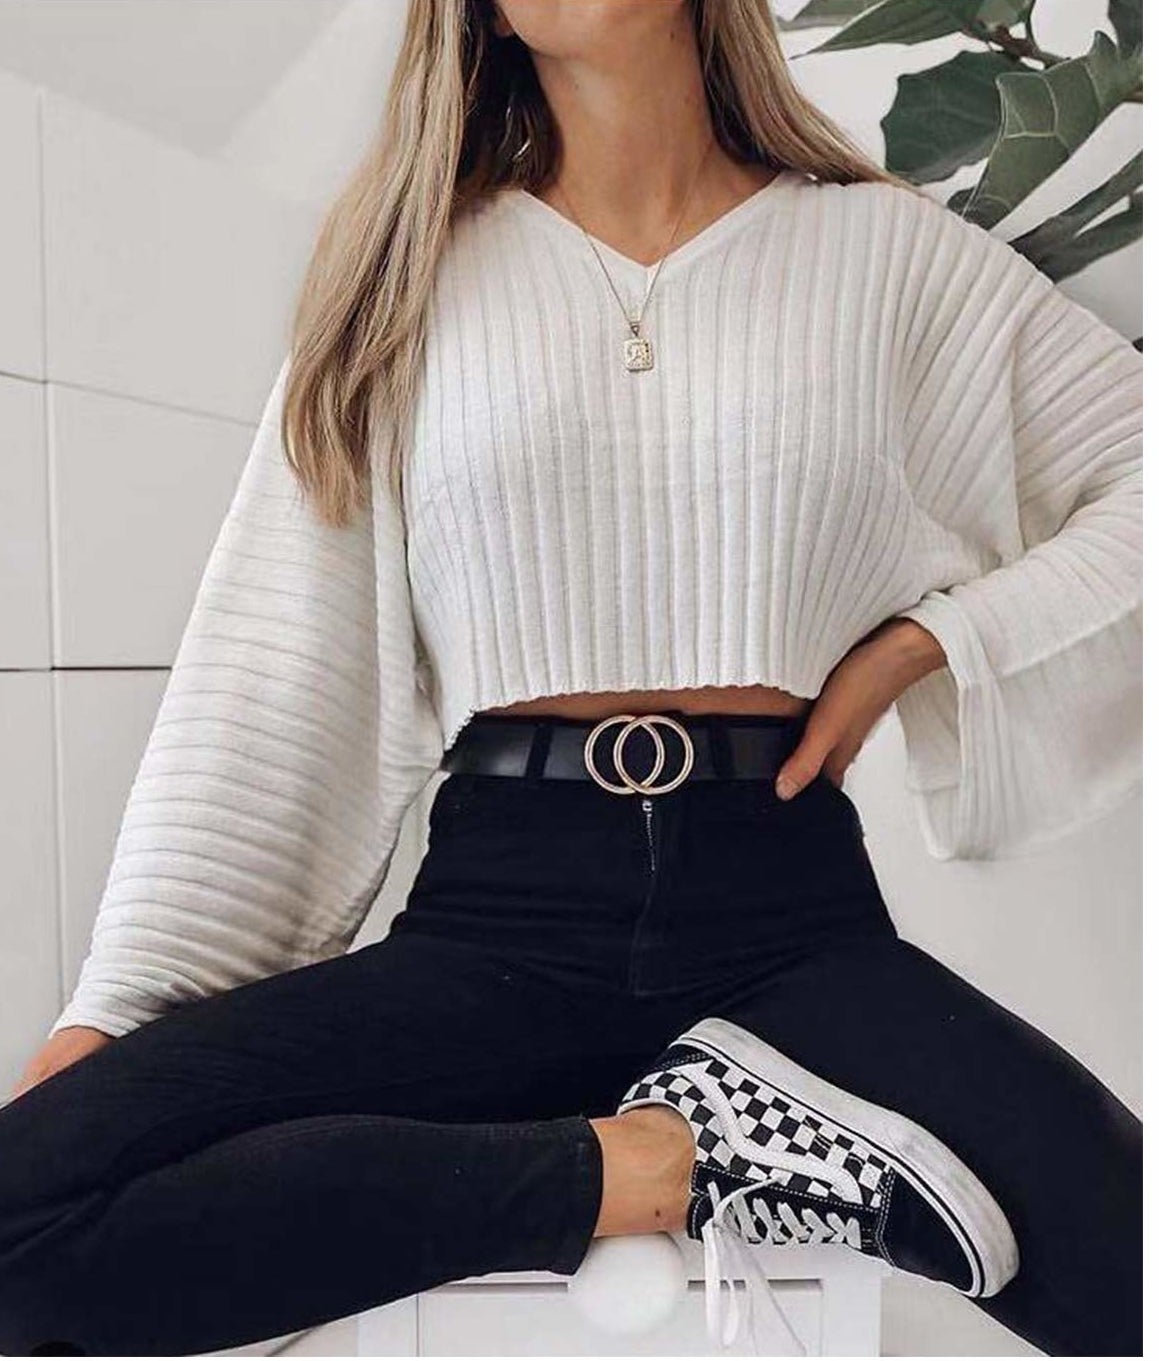 A person sitting with their hand on their hip They are wearing a long sleeved shirt, jeans, and a belt with a buckle in the shape of two interlocked circles